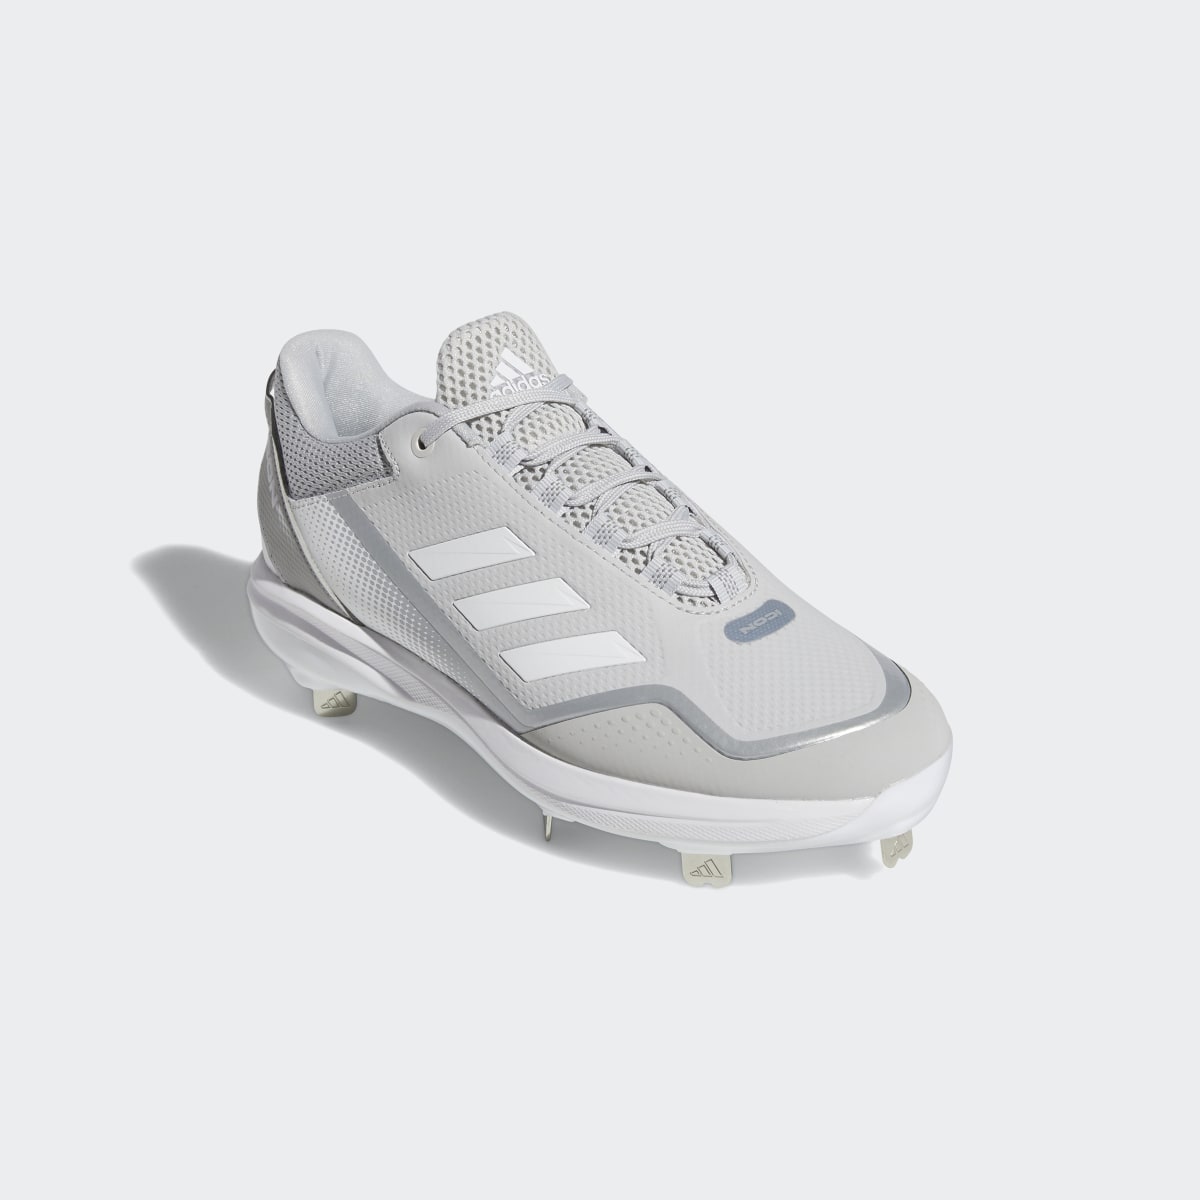 Adidas Icon 7 Cleats. 5